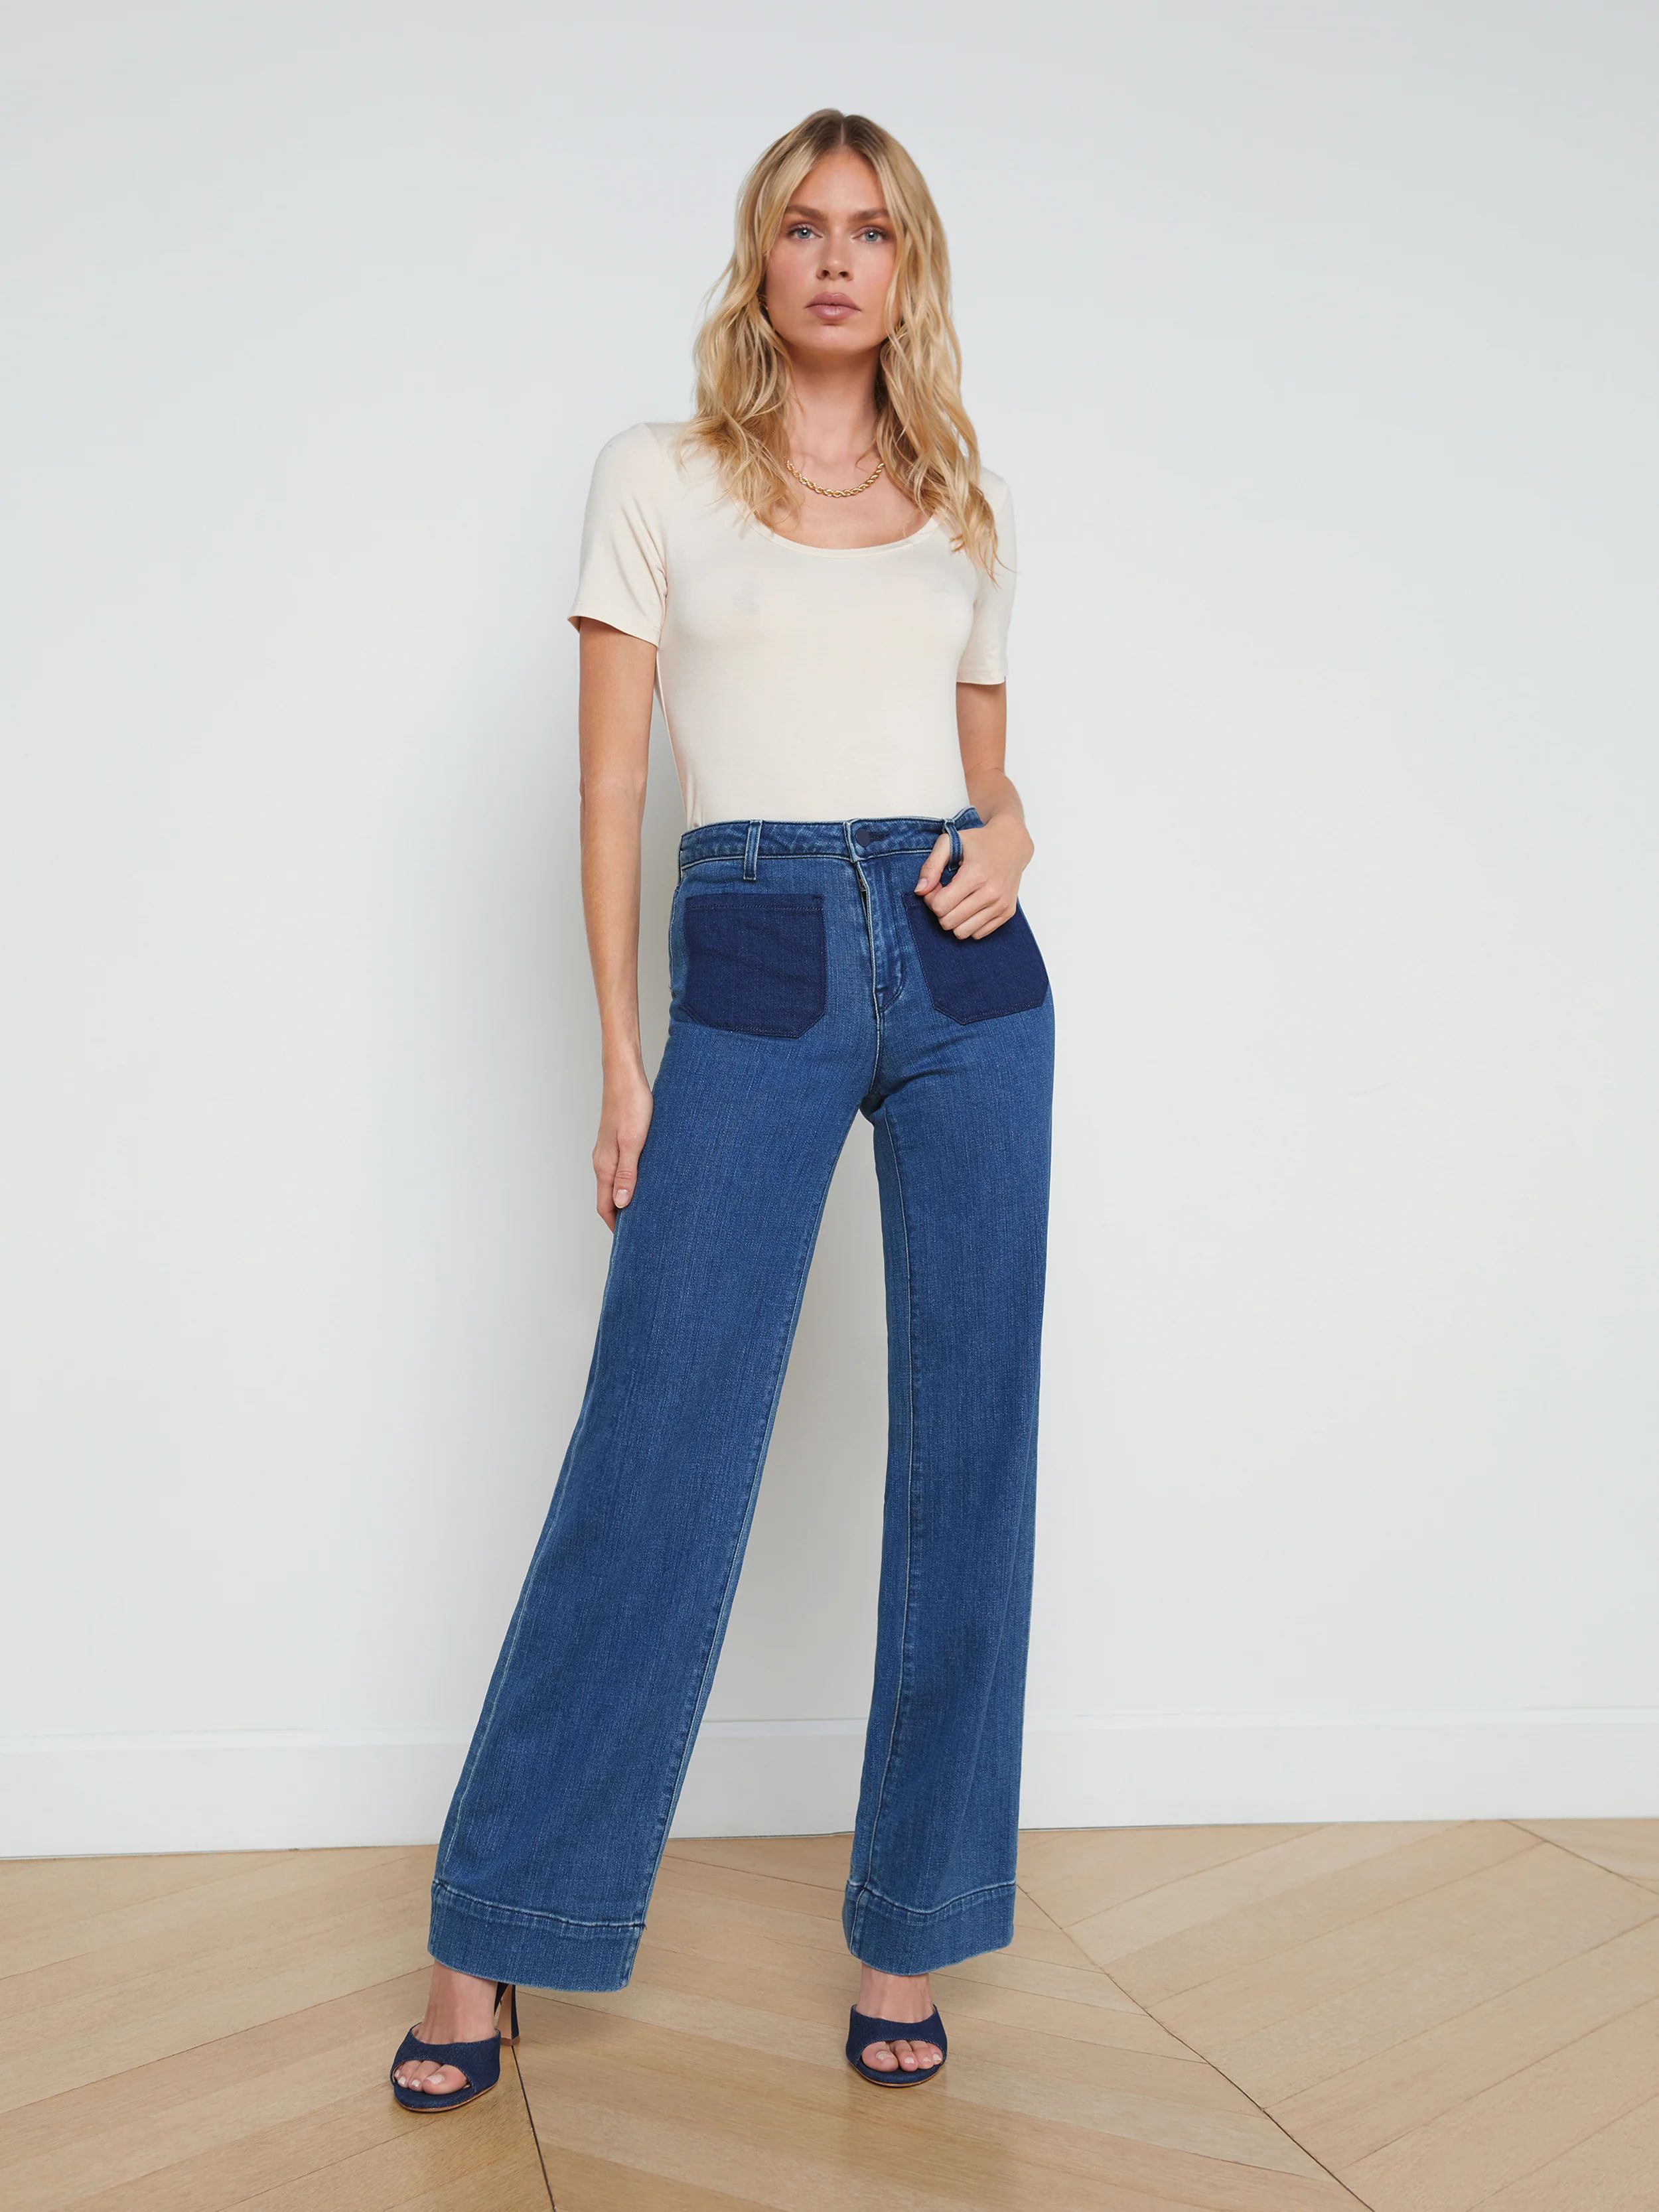 L'AGENCE - Nolan High-Rise Wide-Leg Patch Pocket Jean in Dorsey | L'Agence